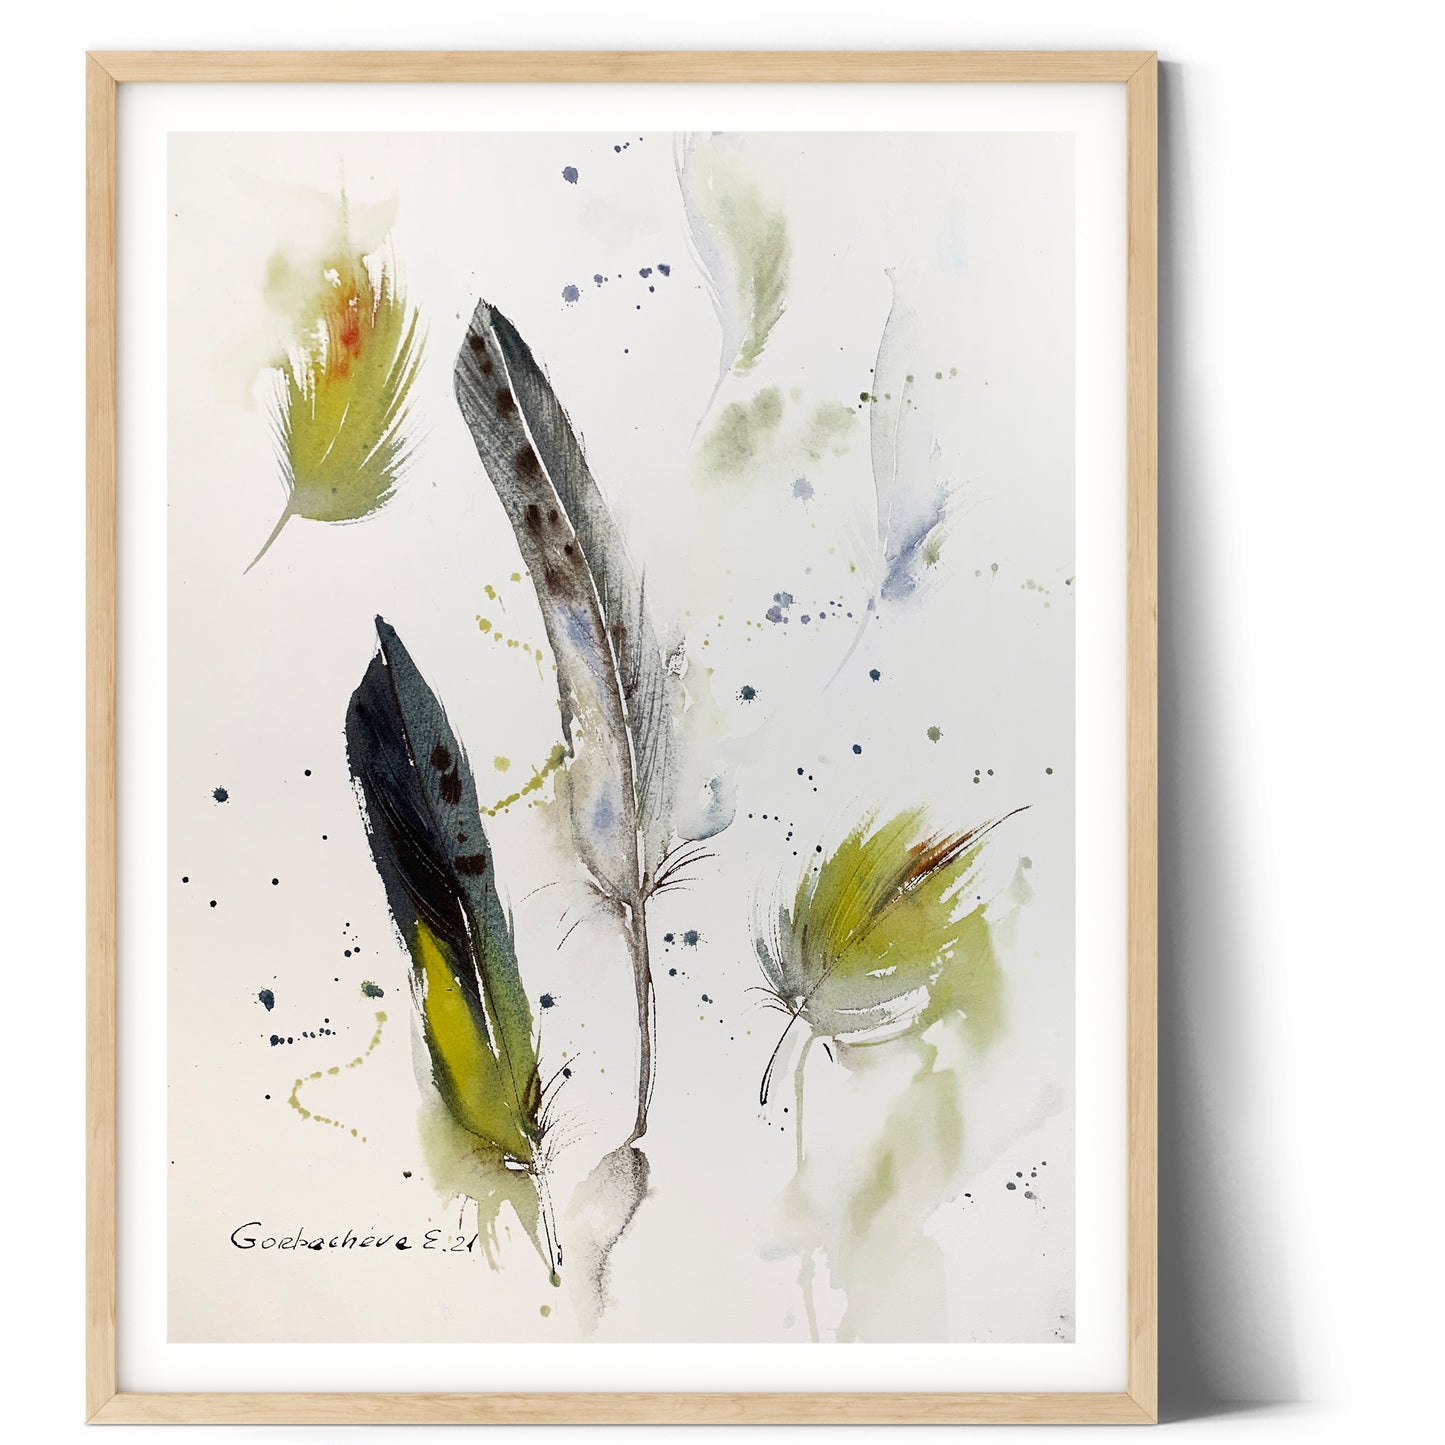 Feather Watercolor Painting Original, Tropic Art, Gift Artwork Wall Décor | NOT A PRINT